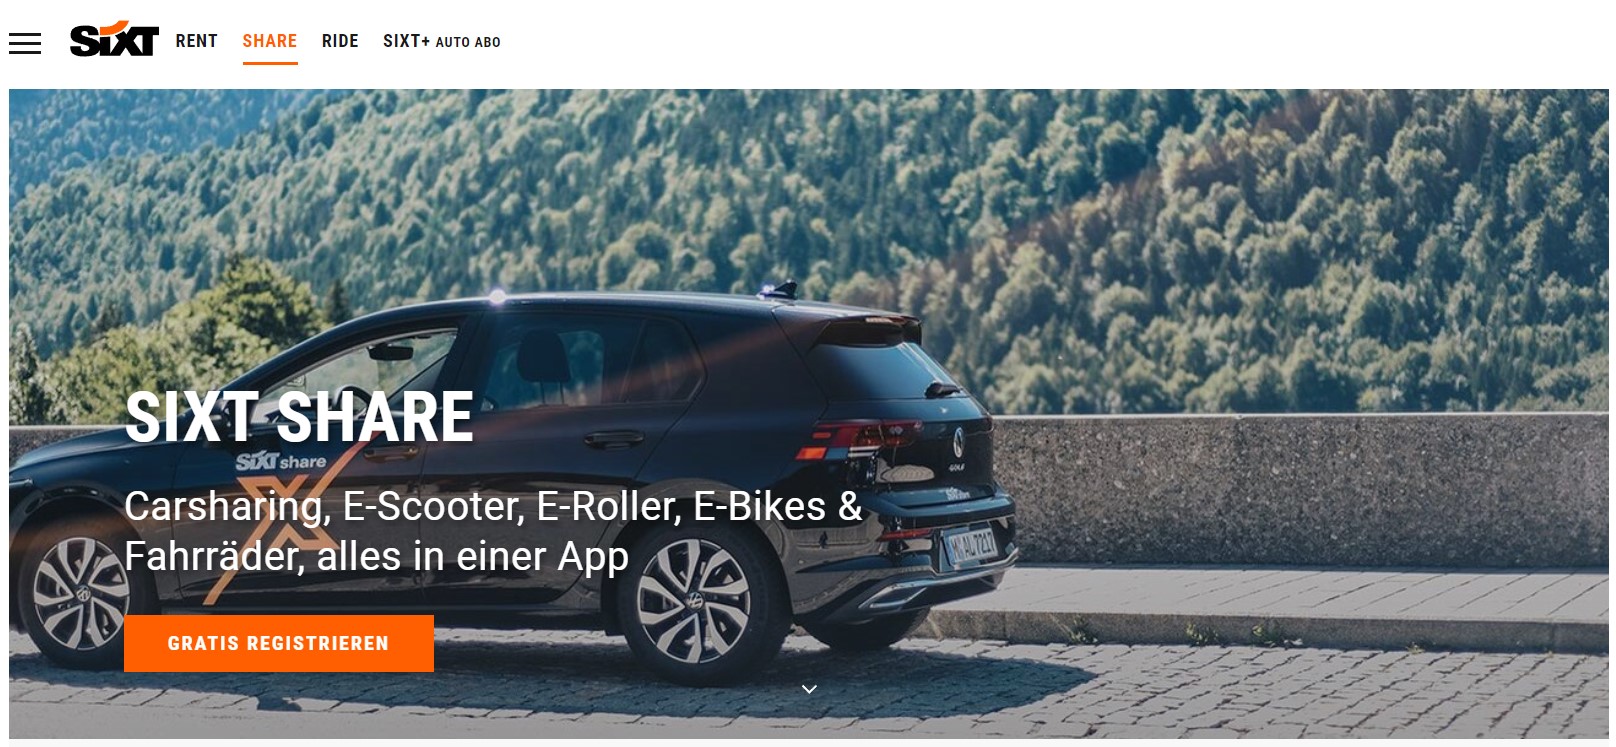 sixt sharing car sharing services in Germany